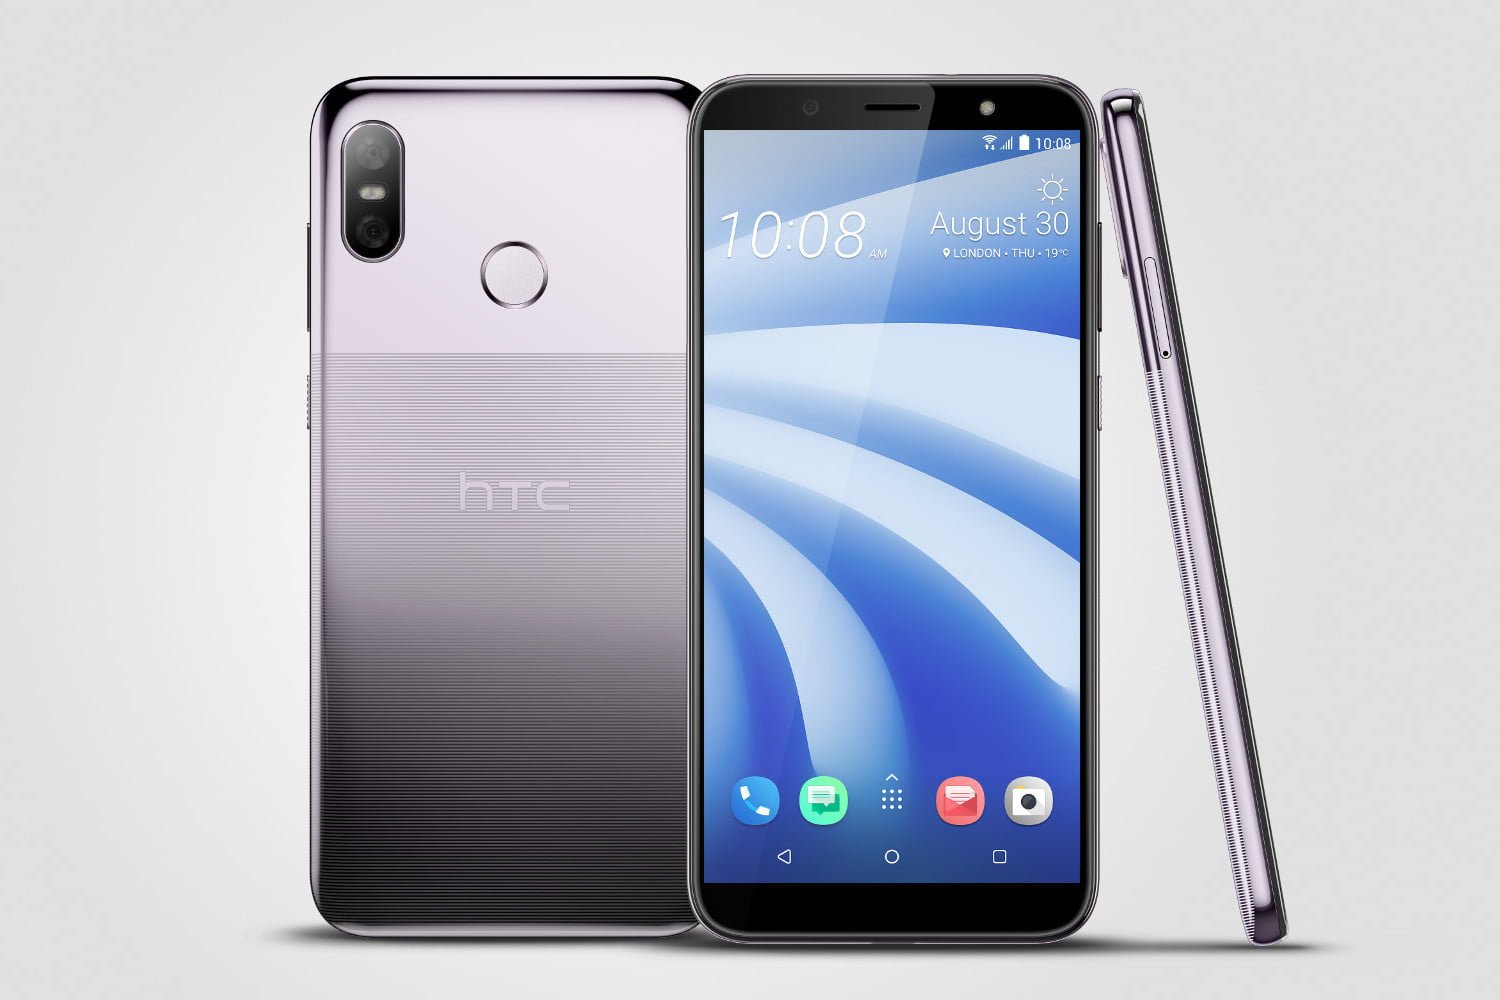 How to Root HTC U12 life with Magisk without TWRP